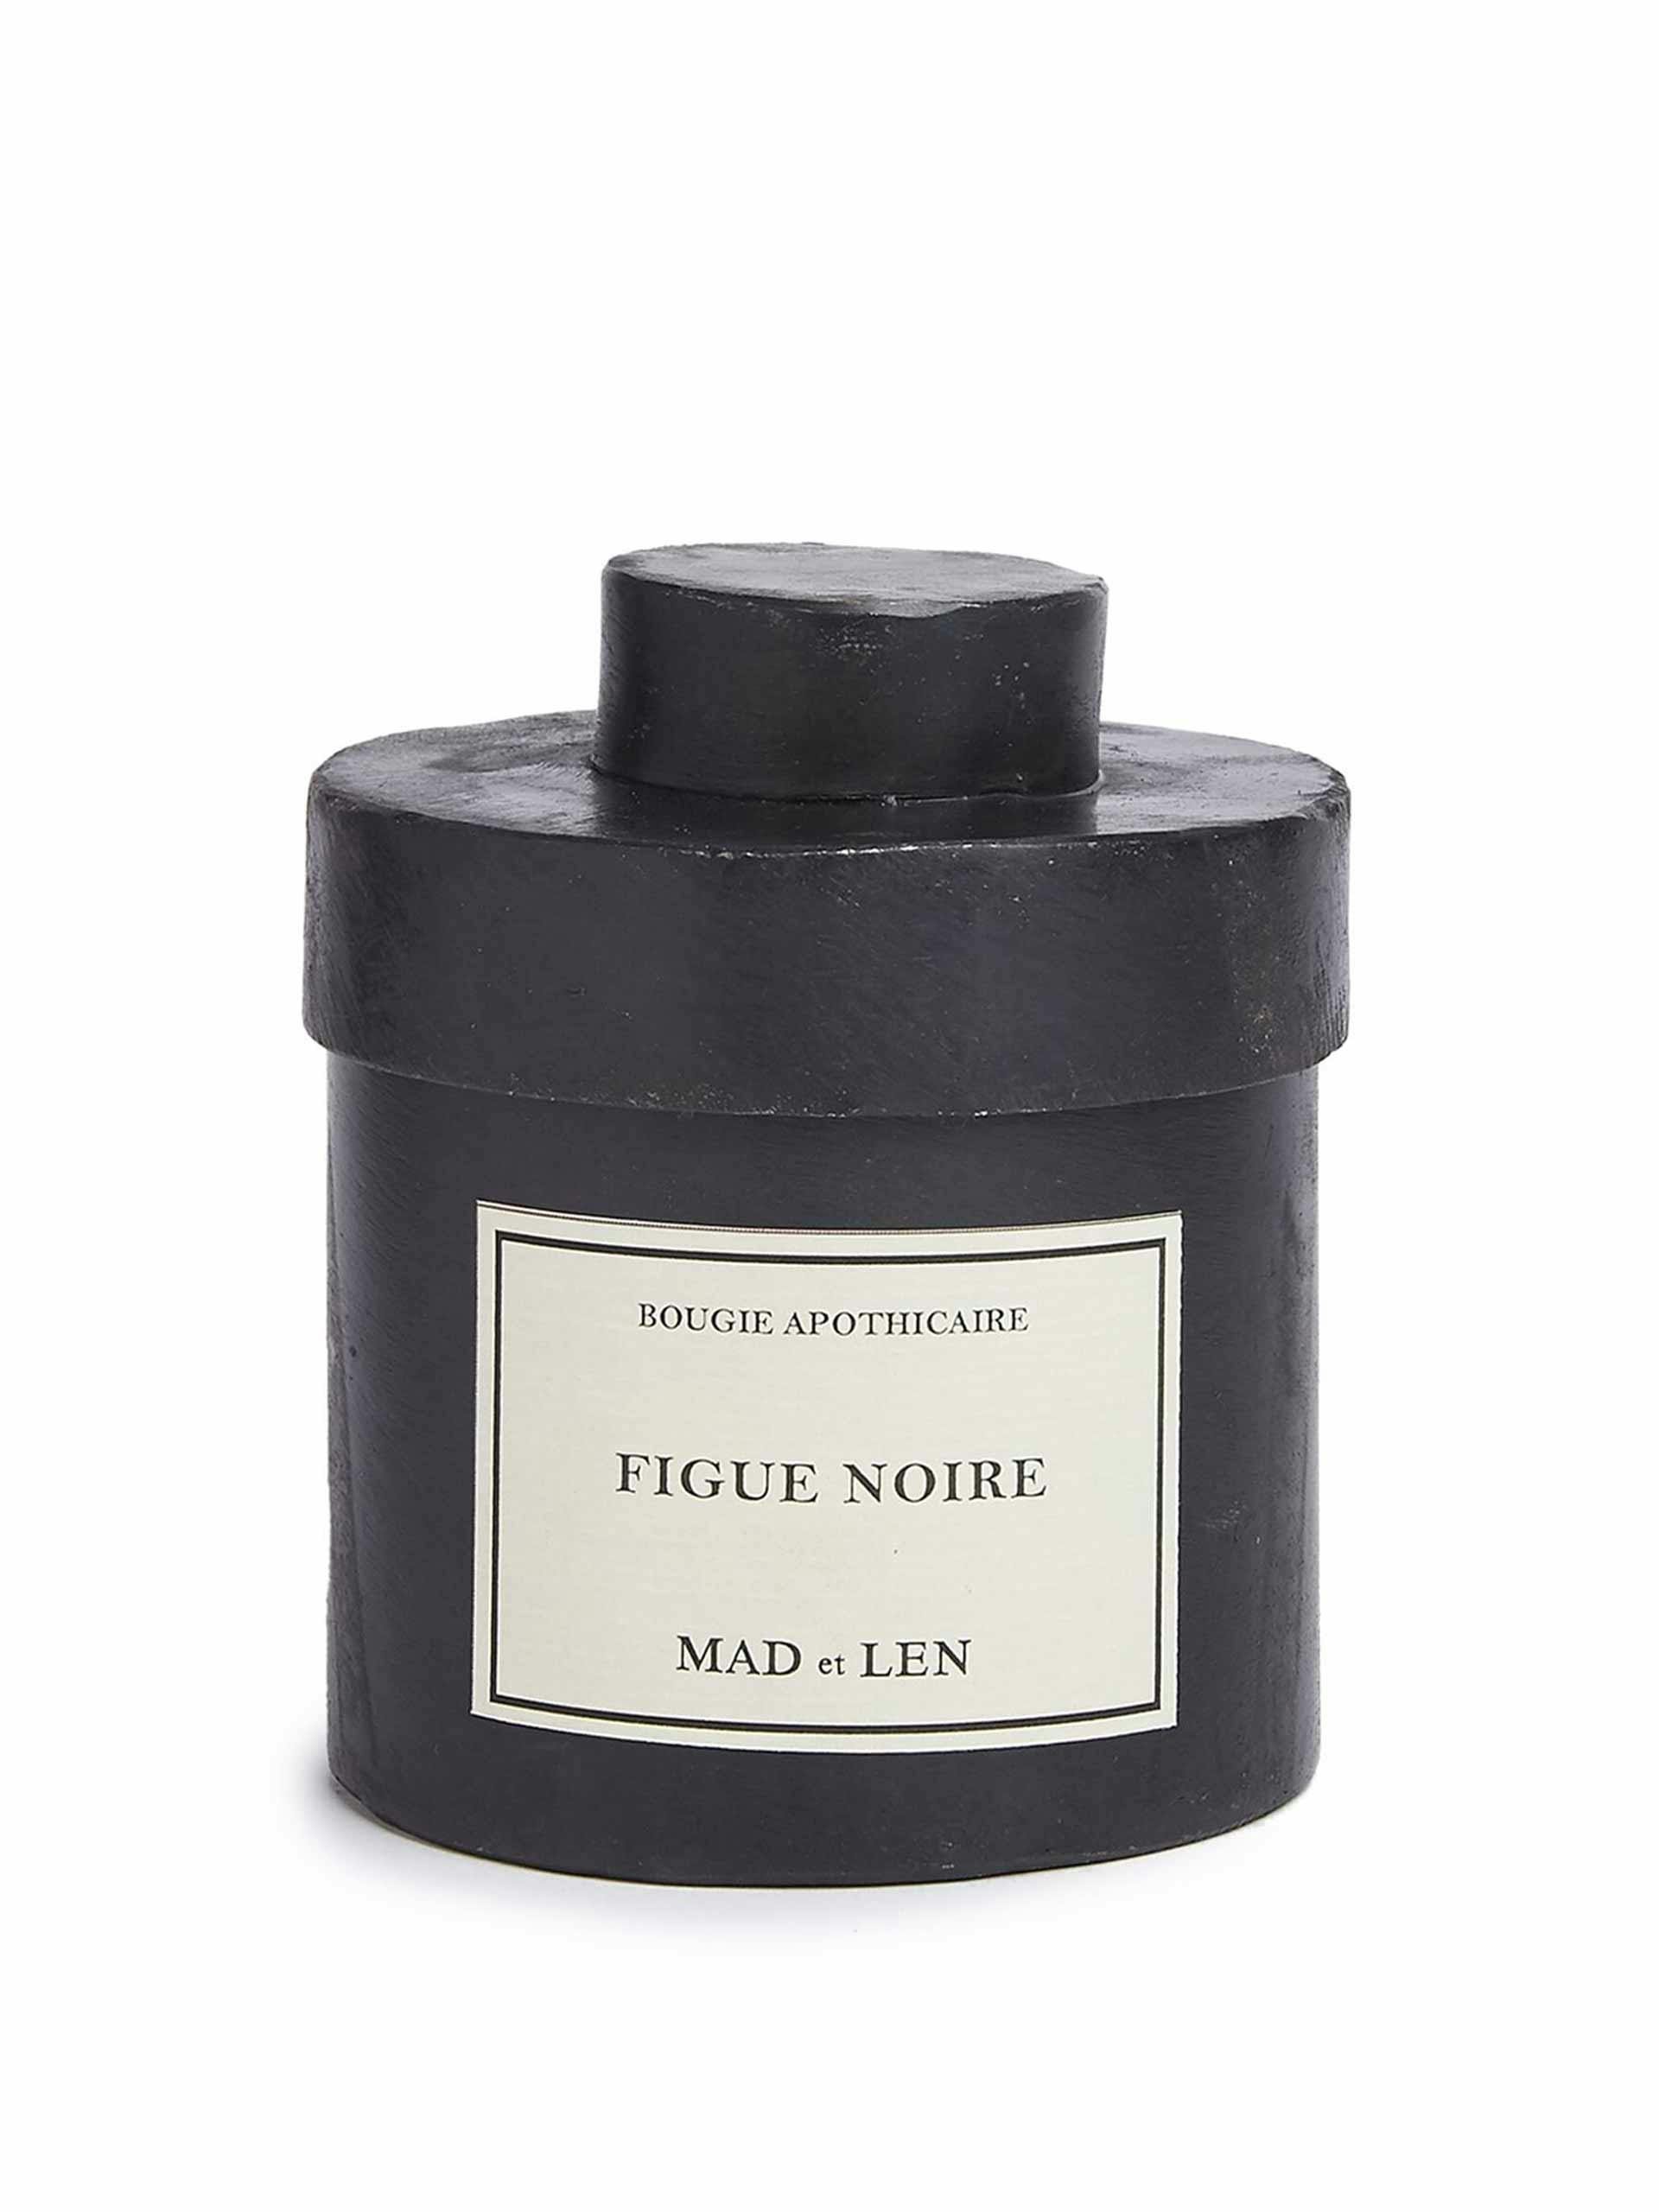 Figue noire scented candle